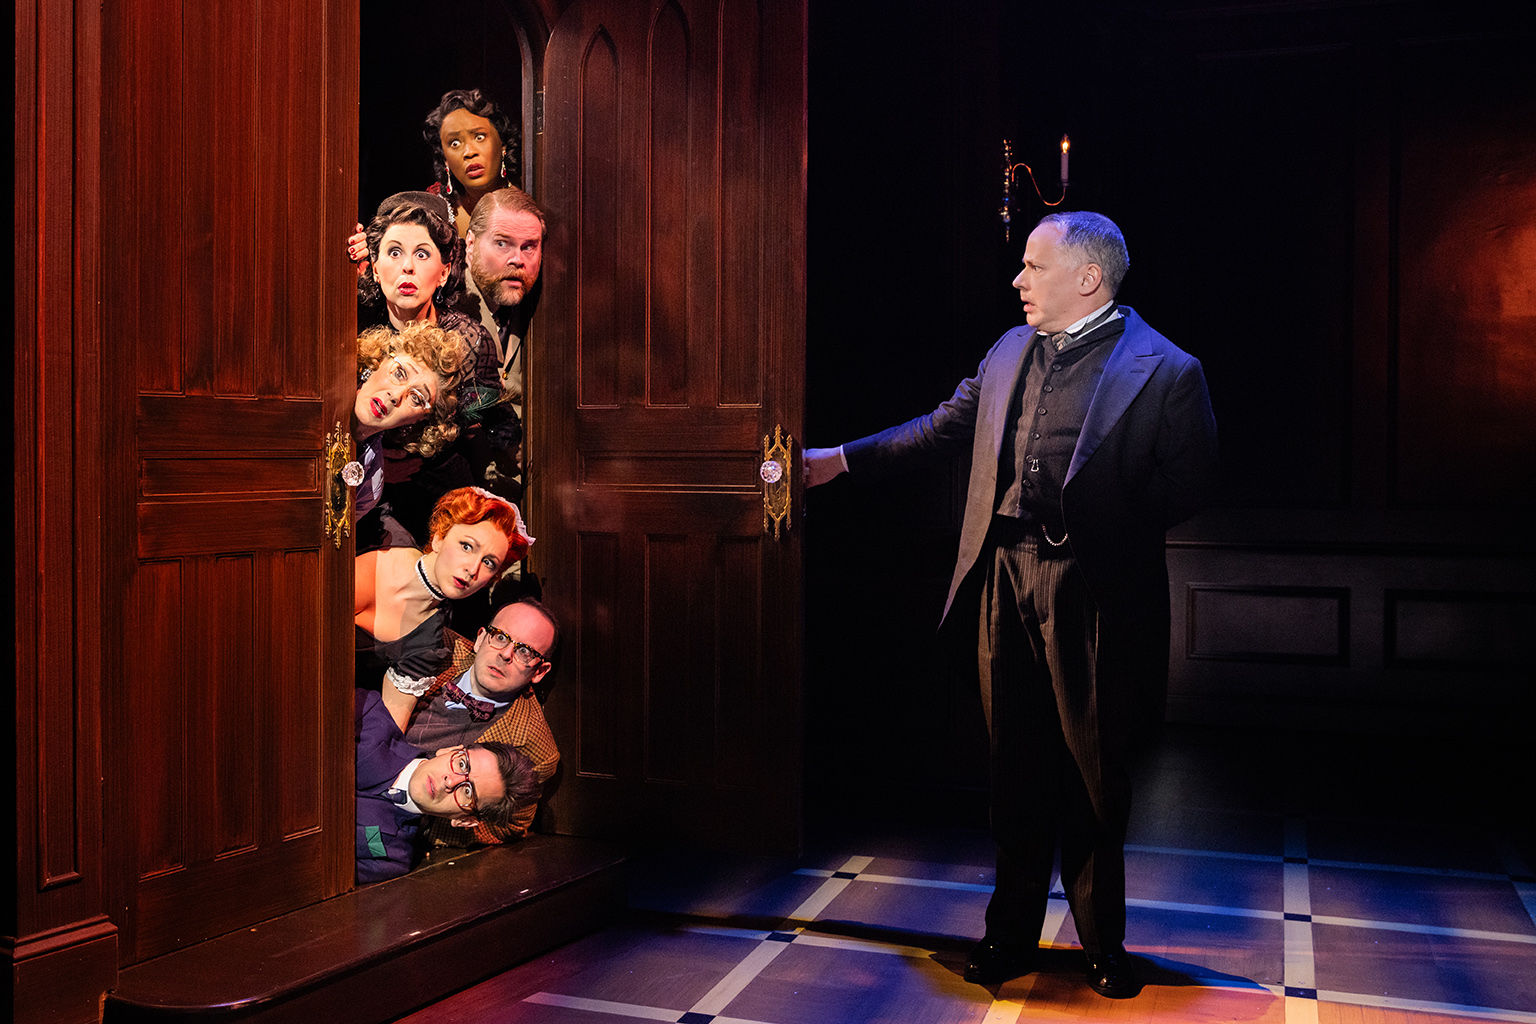 The Company of the North American tour of CLUE - photo by Evan Zimmerman for MurphyMade<br><br>Seven actors lay stacked on top of each other horizontally, peeking out from behind an open door. Only their surprised faces are visible outside of the door frame. Across from them, a man in a suit has one arm outstretched, having just opened the door.